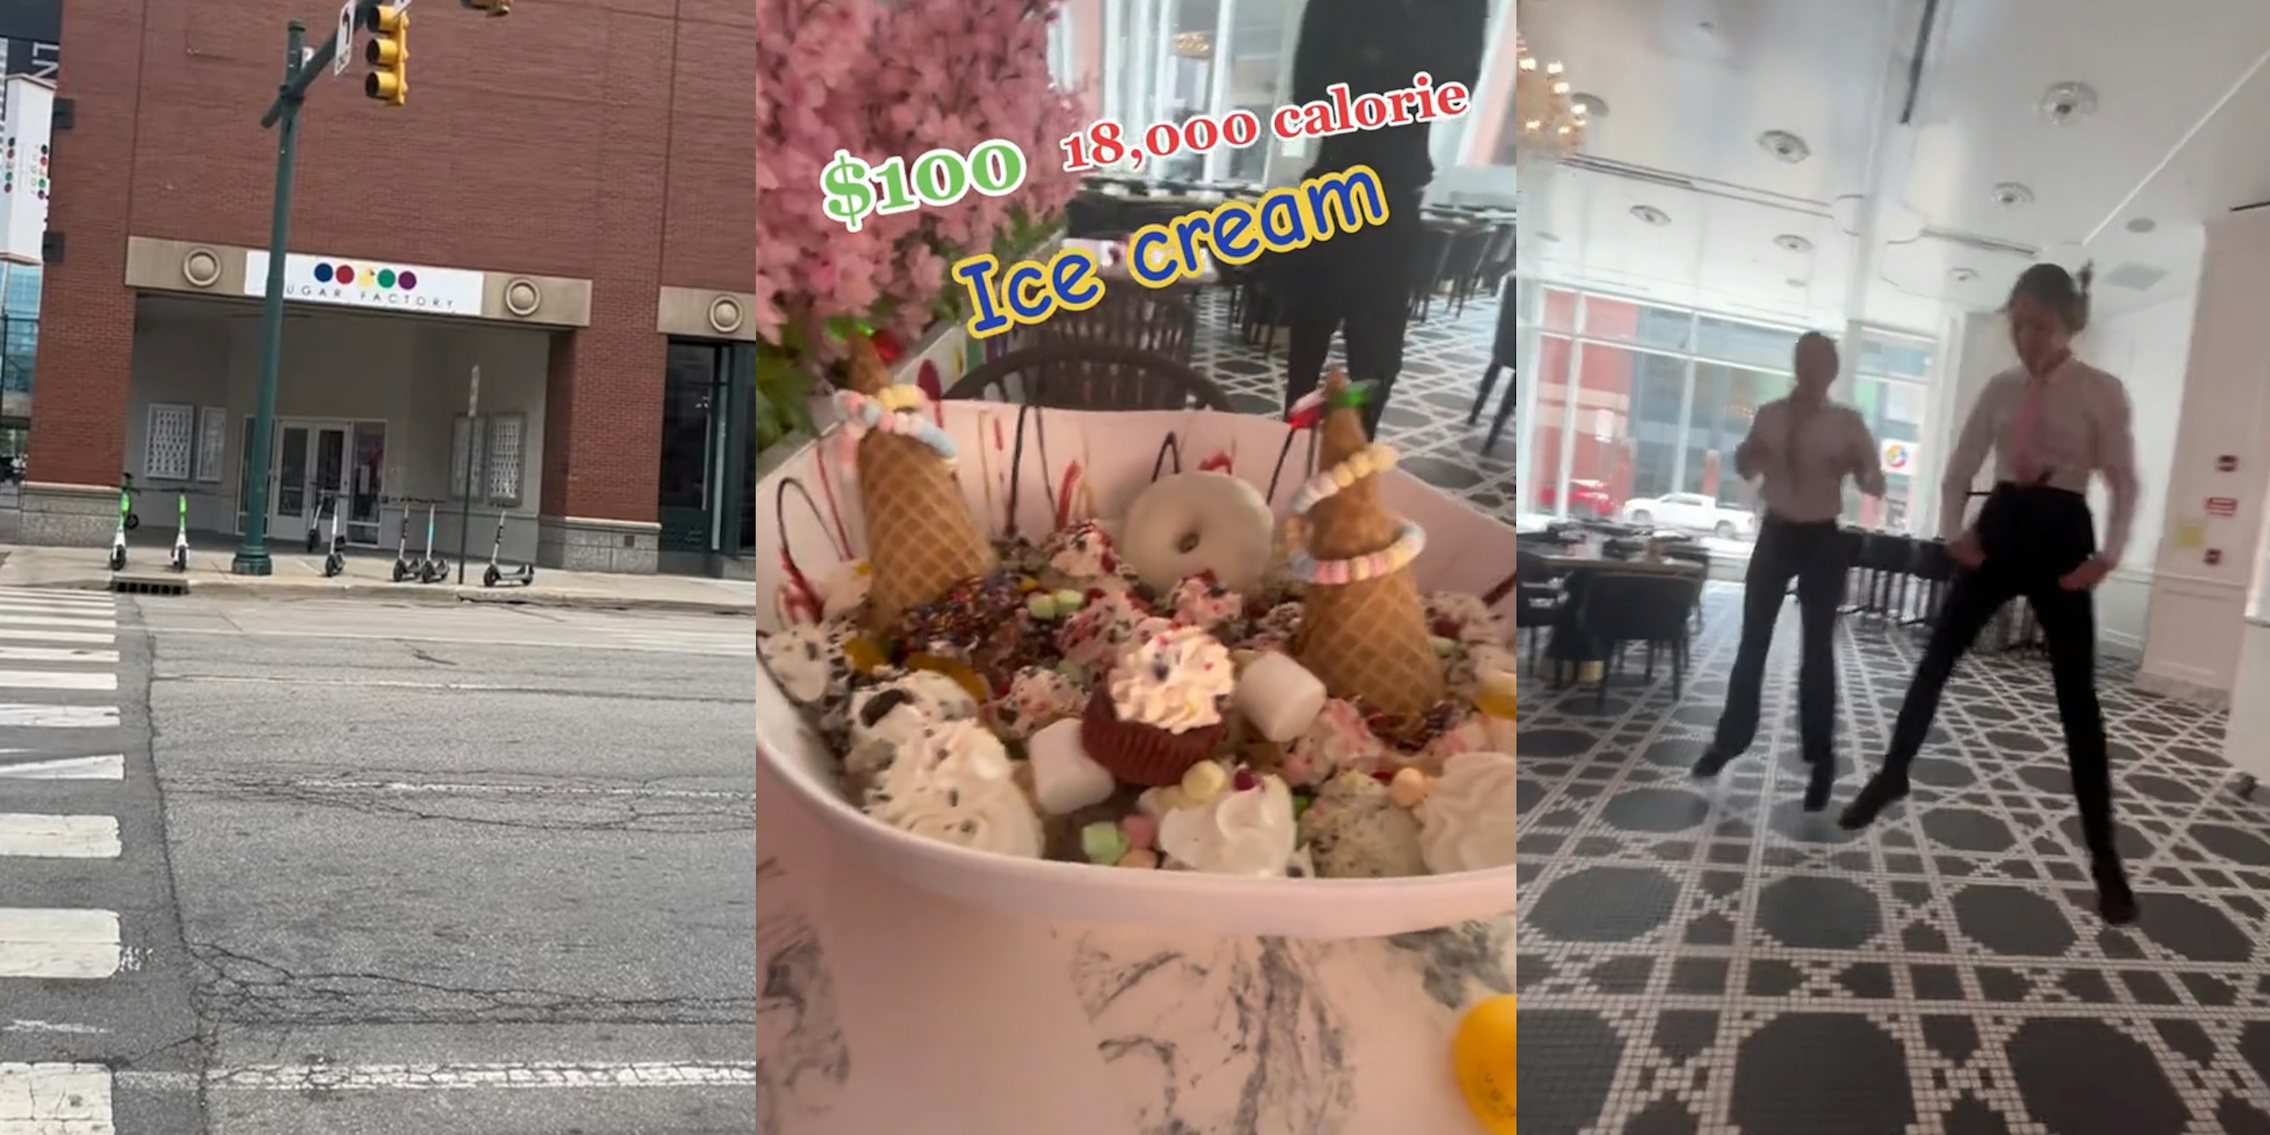 Sugar Factory restaurant view from street (l) ice cream in bowl with caption '$100 18,000 calorie Ice cream' (c) Sugar Factory workers dancing (r)